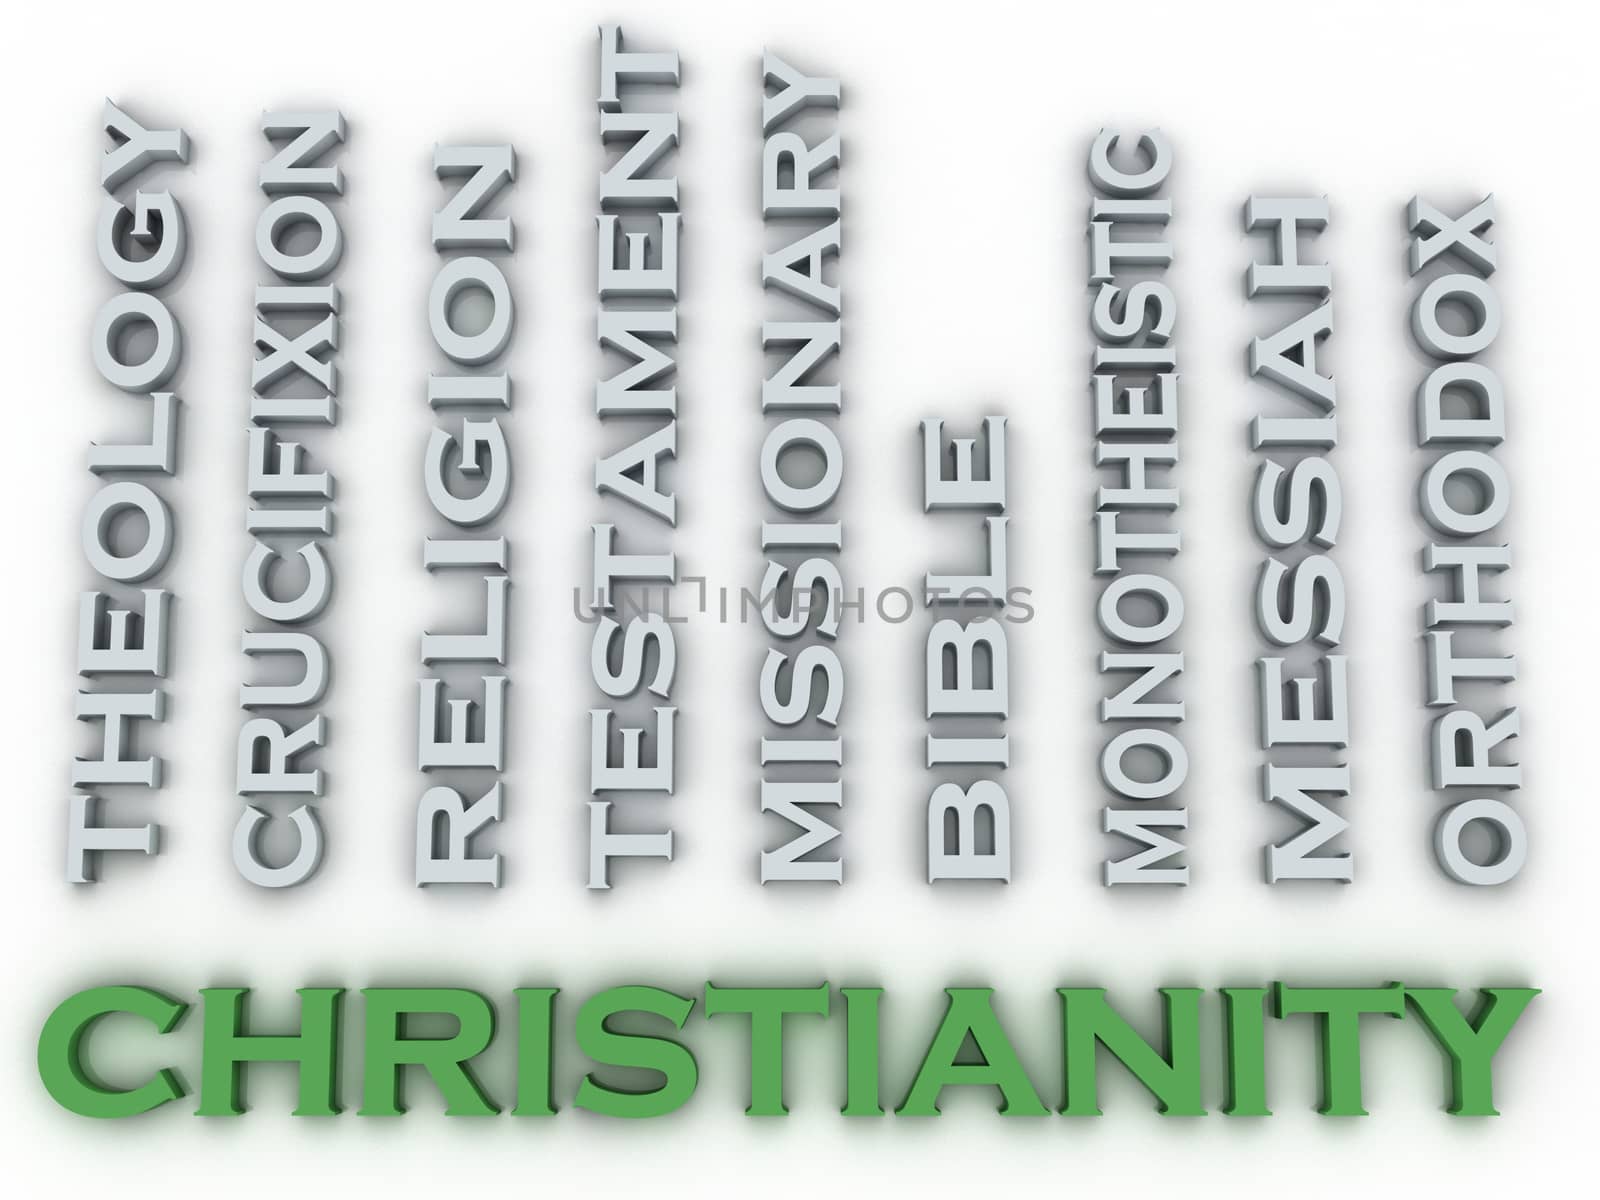 3d image Christianity issues concept word cloud background by dacasdo